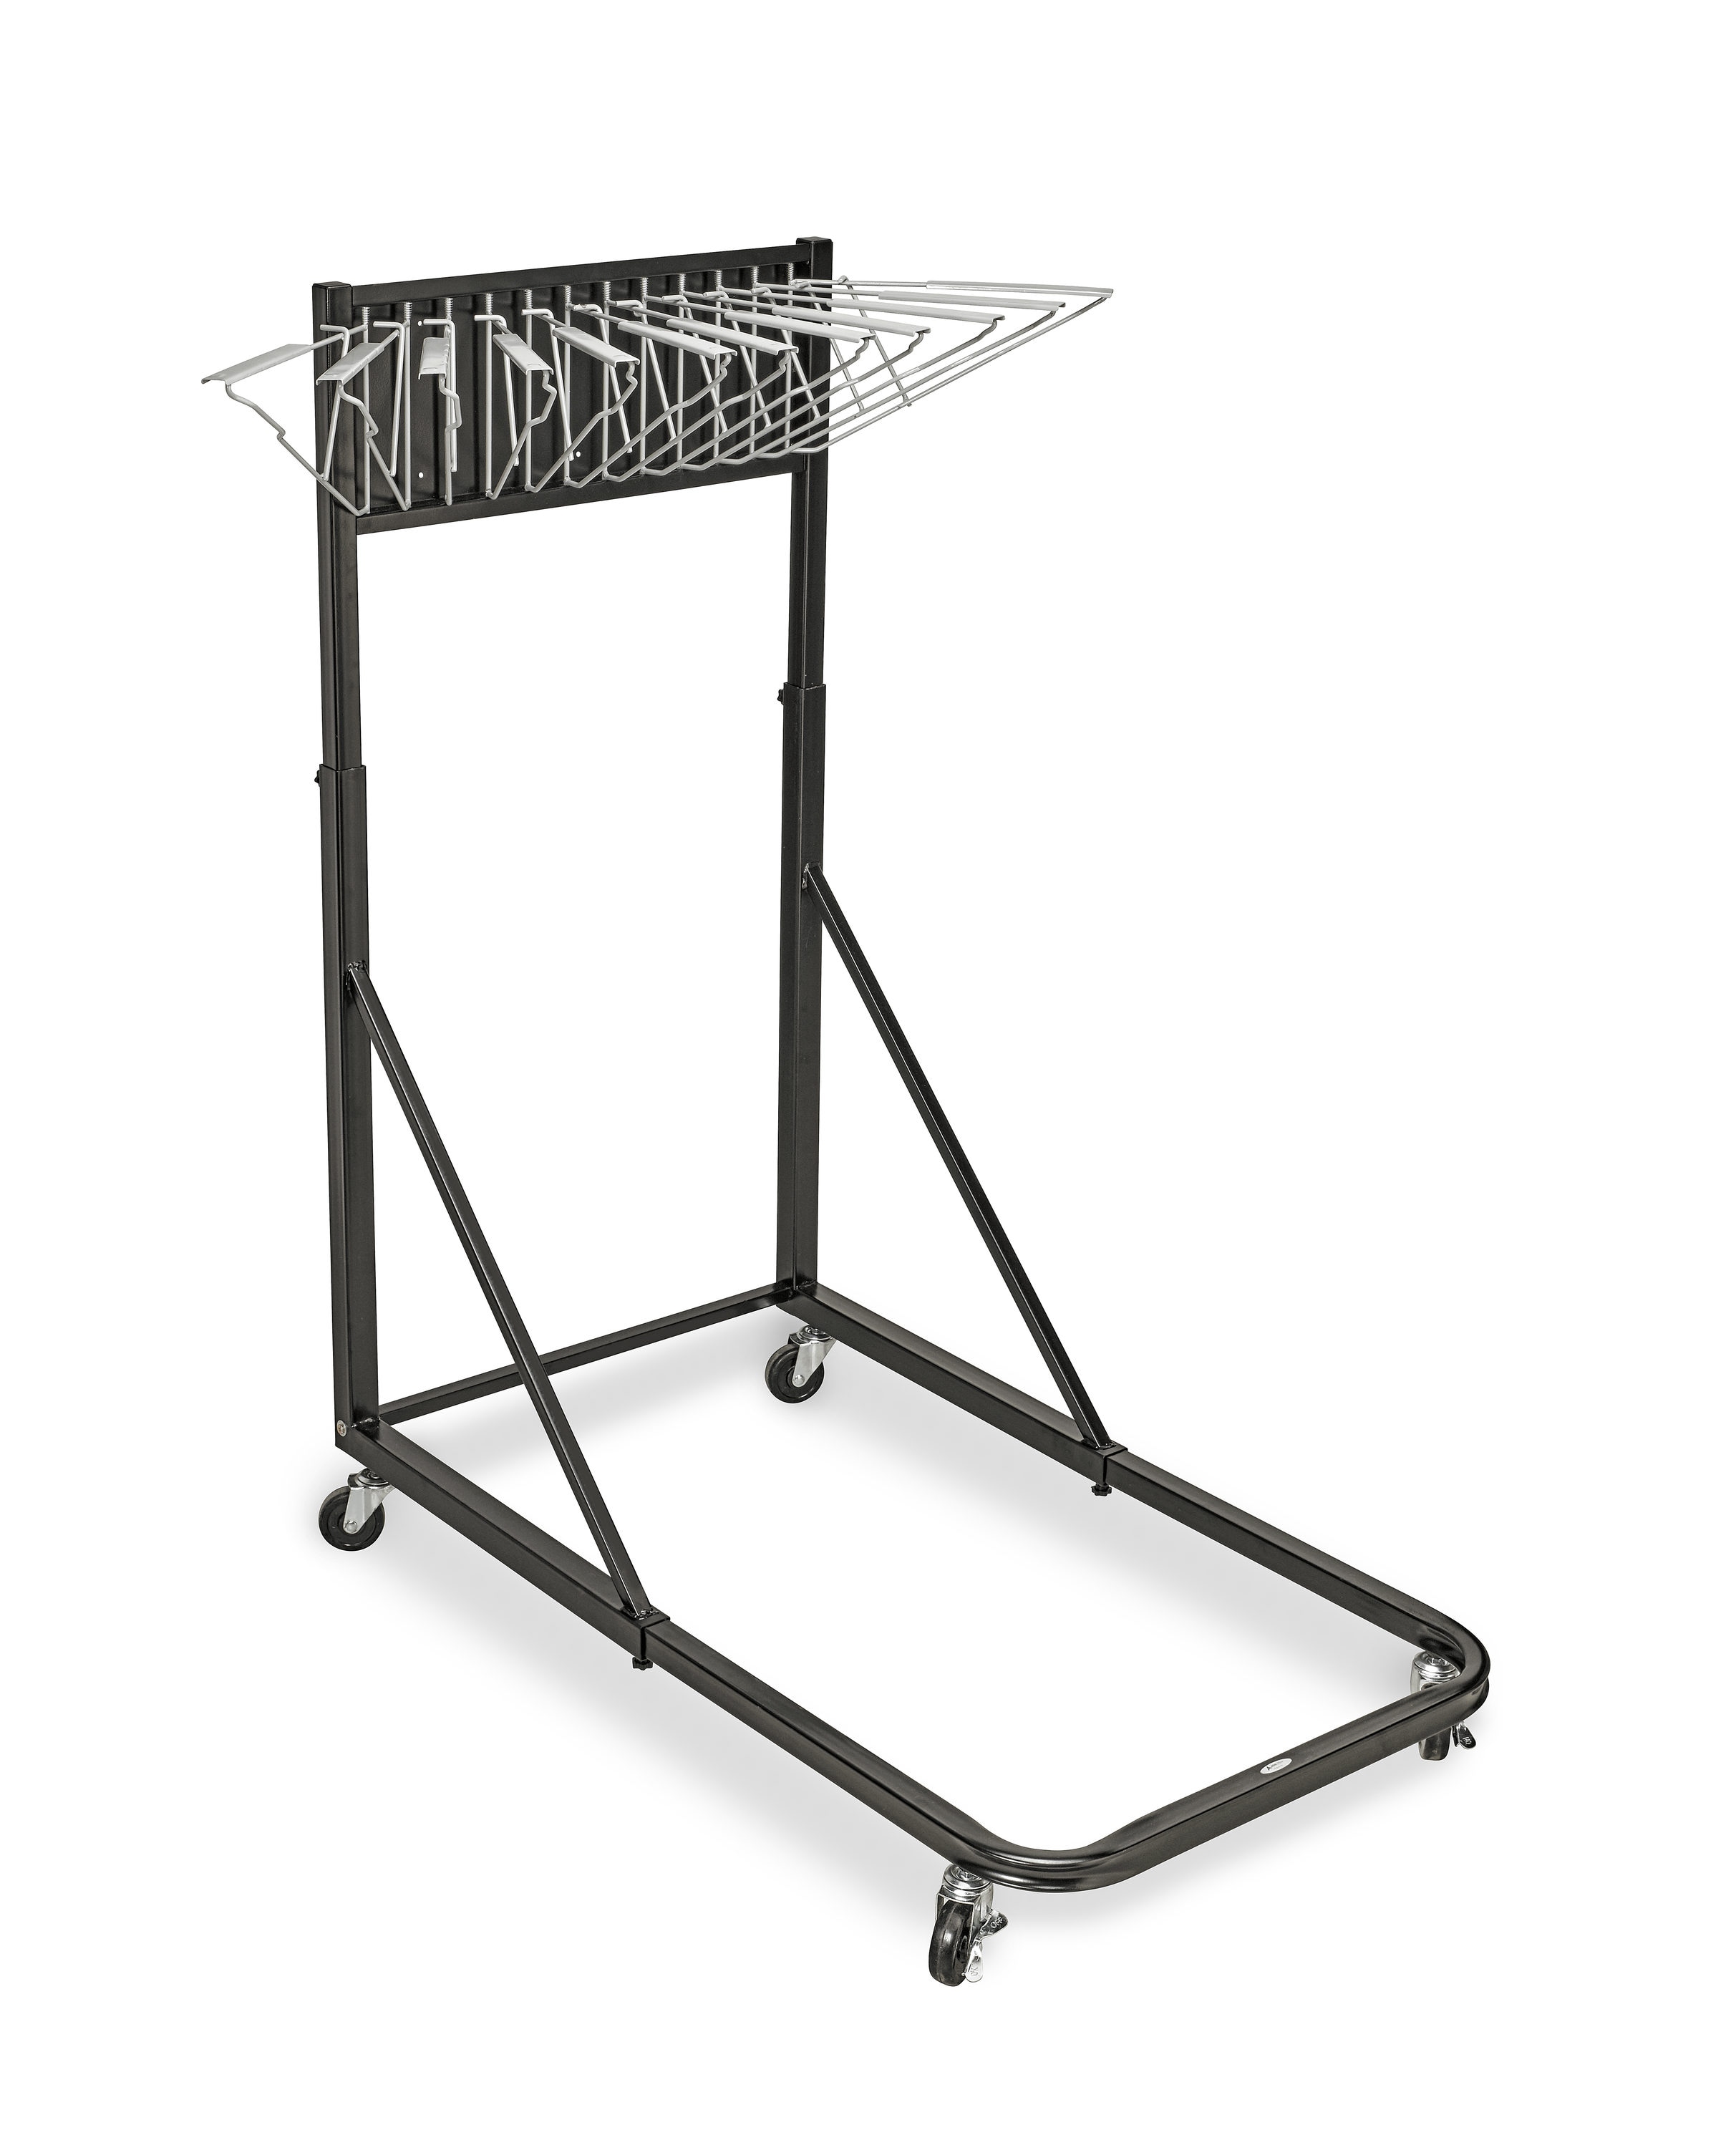 Black Steel Floor Stand Roll Bag Holder/Scale Holder Combo - 22Dia x 74H  (Hoop & Scale sold separately)